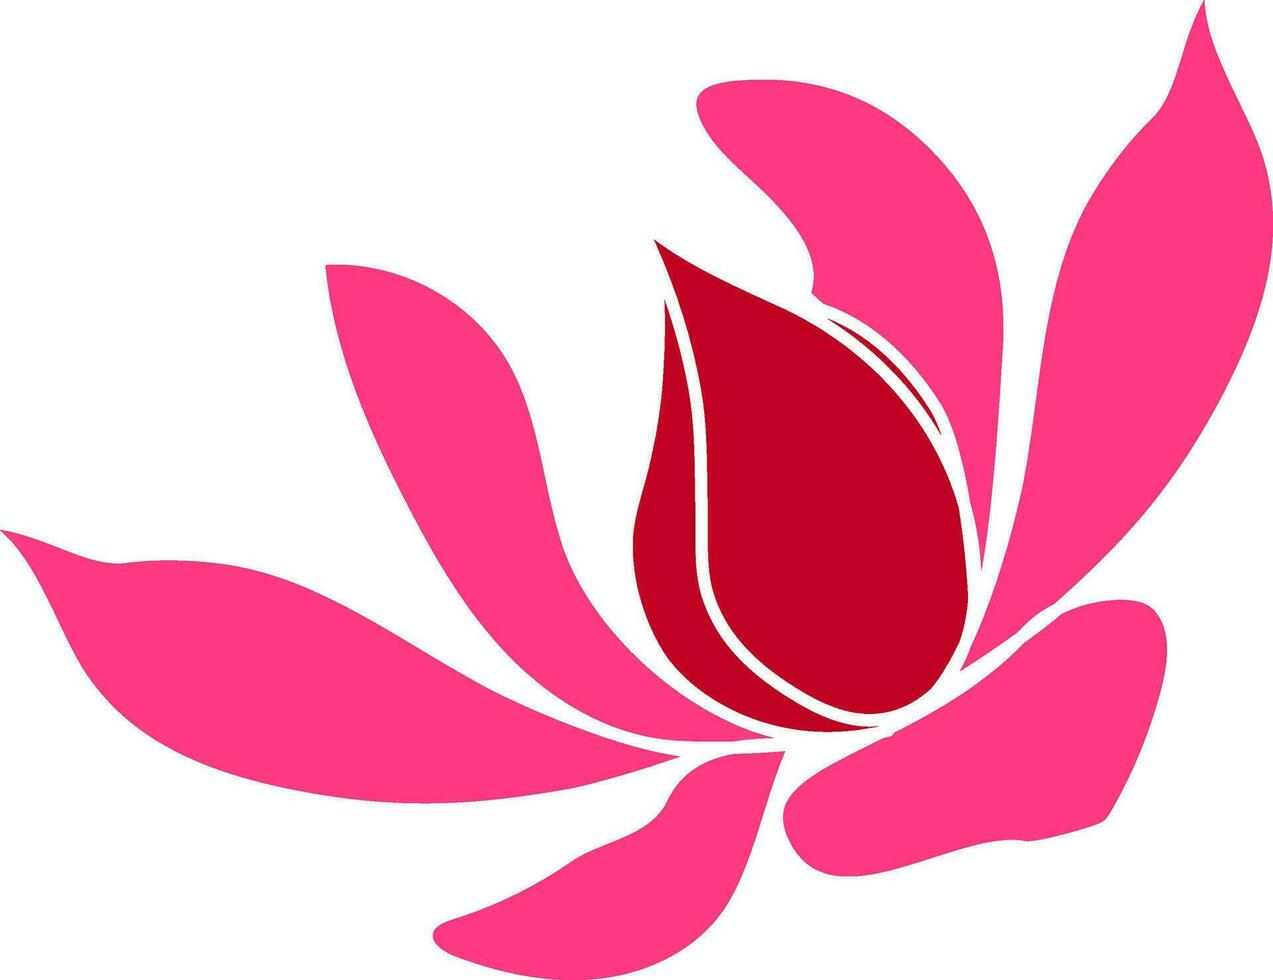 Pink and red color combination flower design. vector